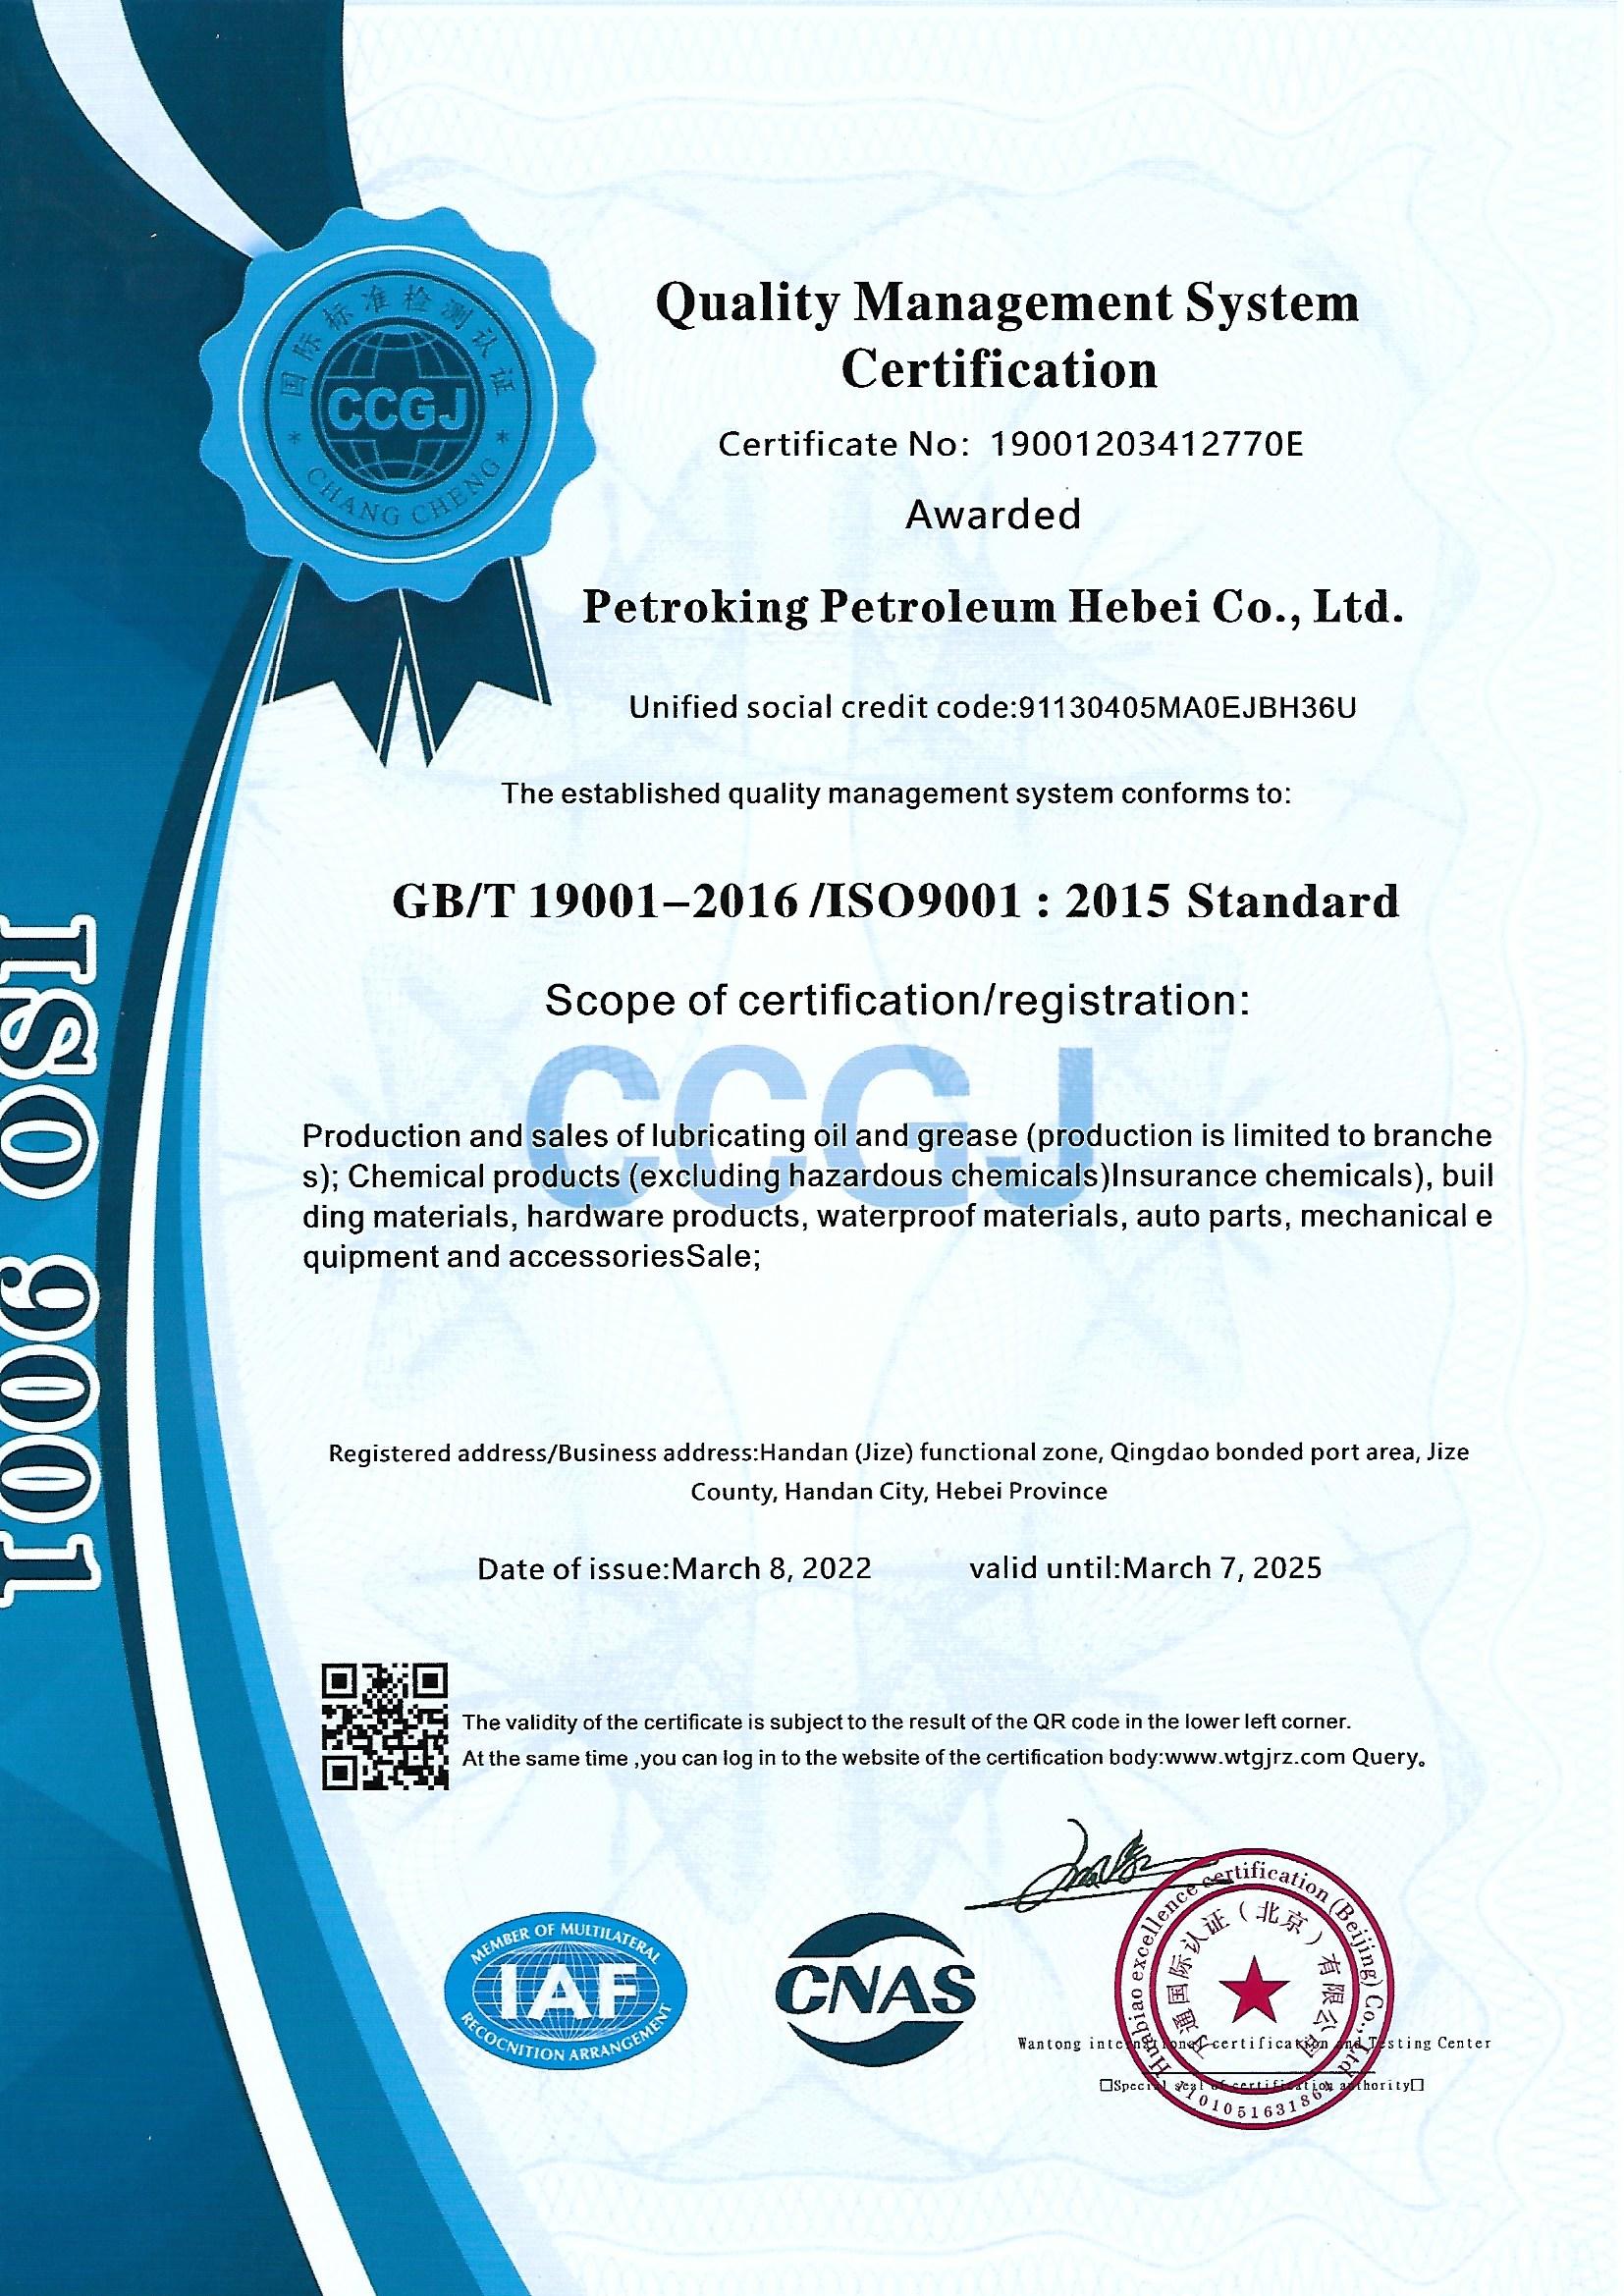 Congratulations on Our Company Won ISO Three International Management Systems Successfully!